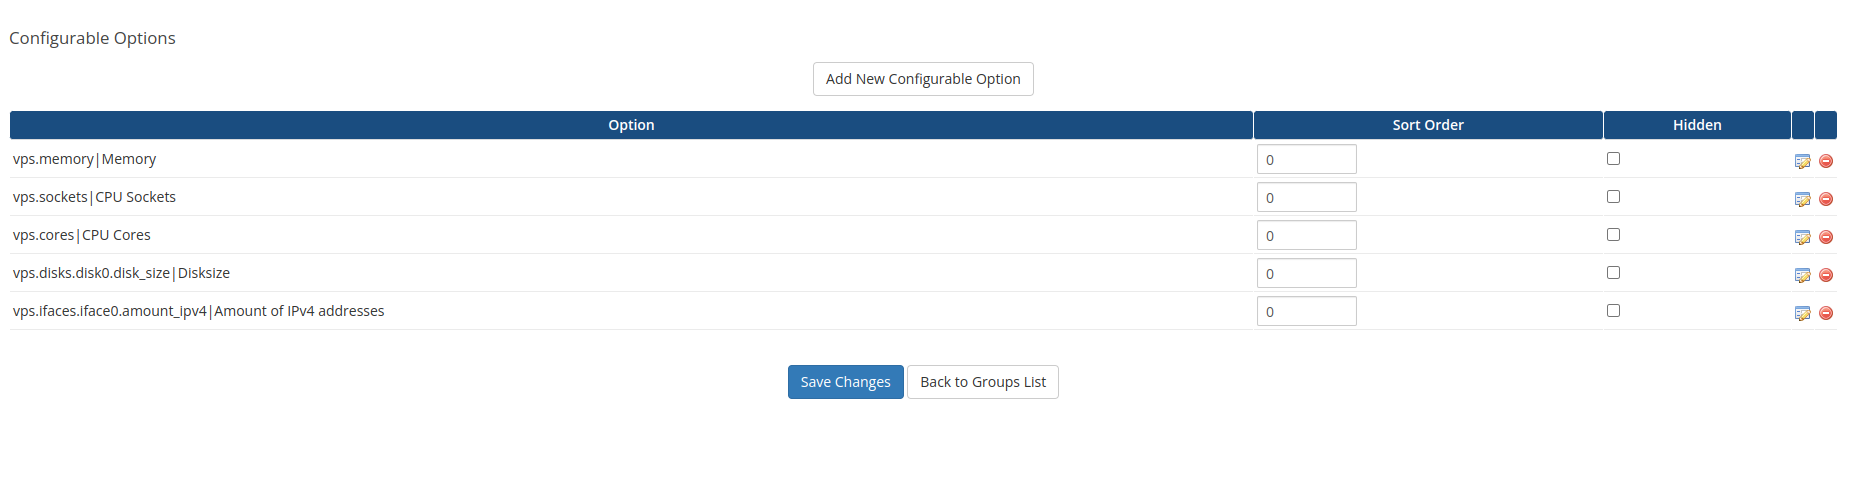 Example Configurable Option Group